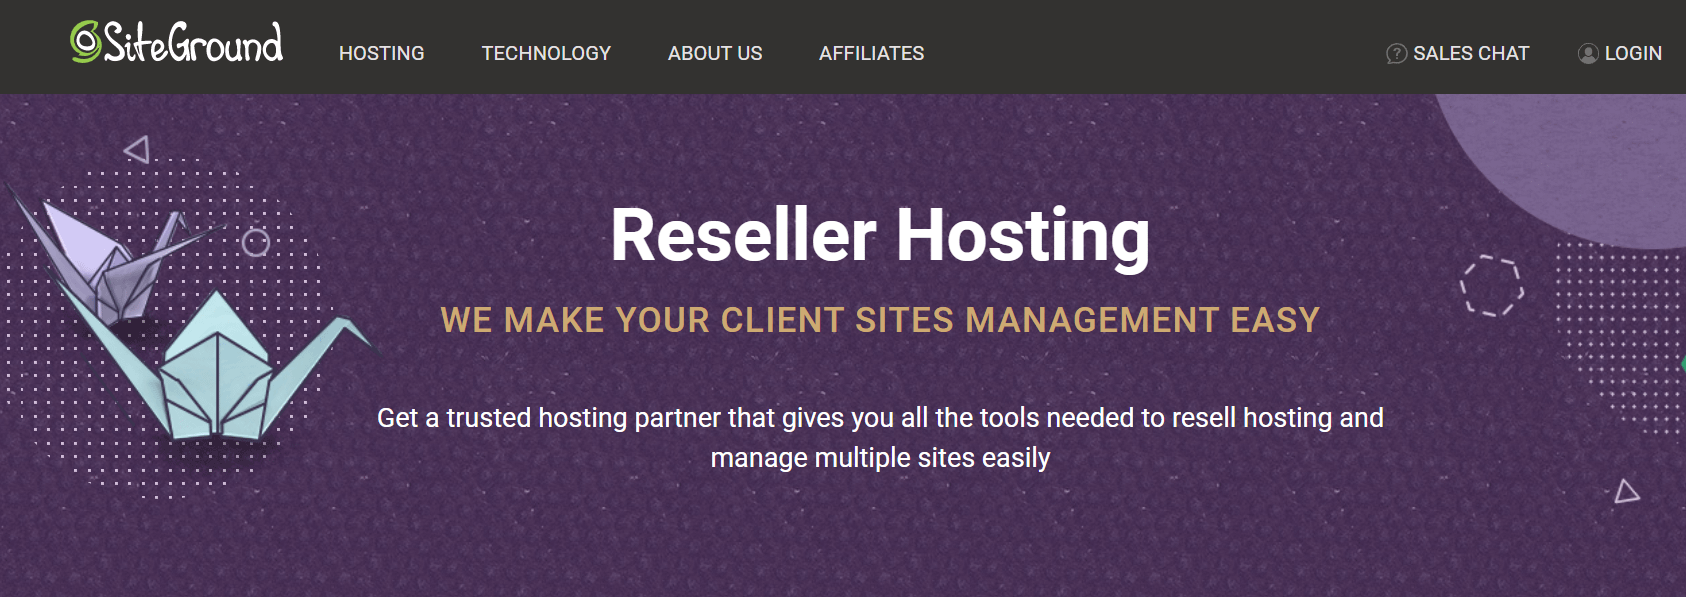 Siteground's reseller hosting page.